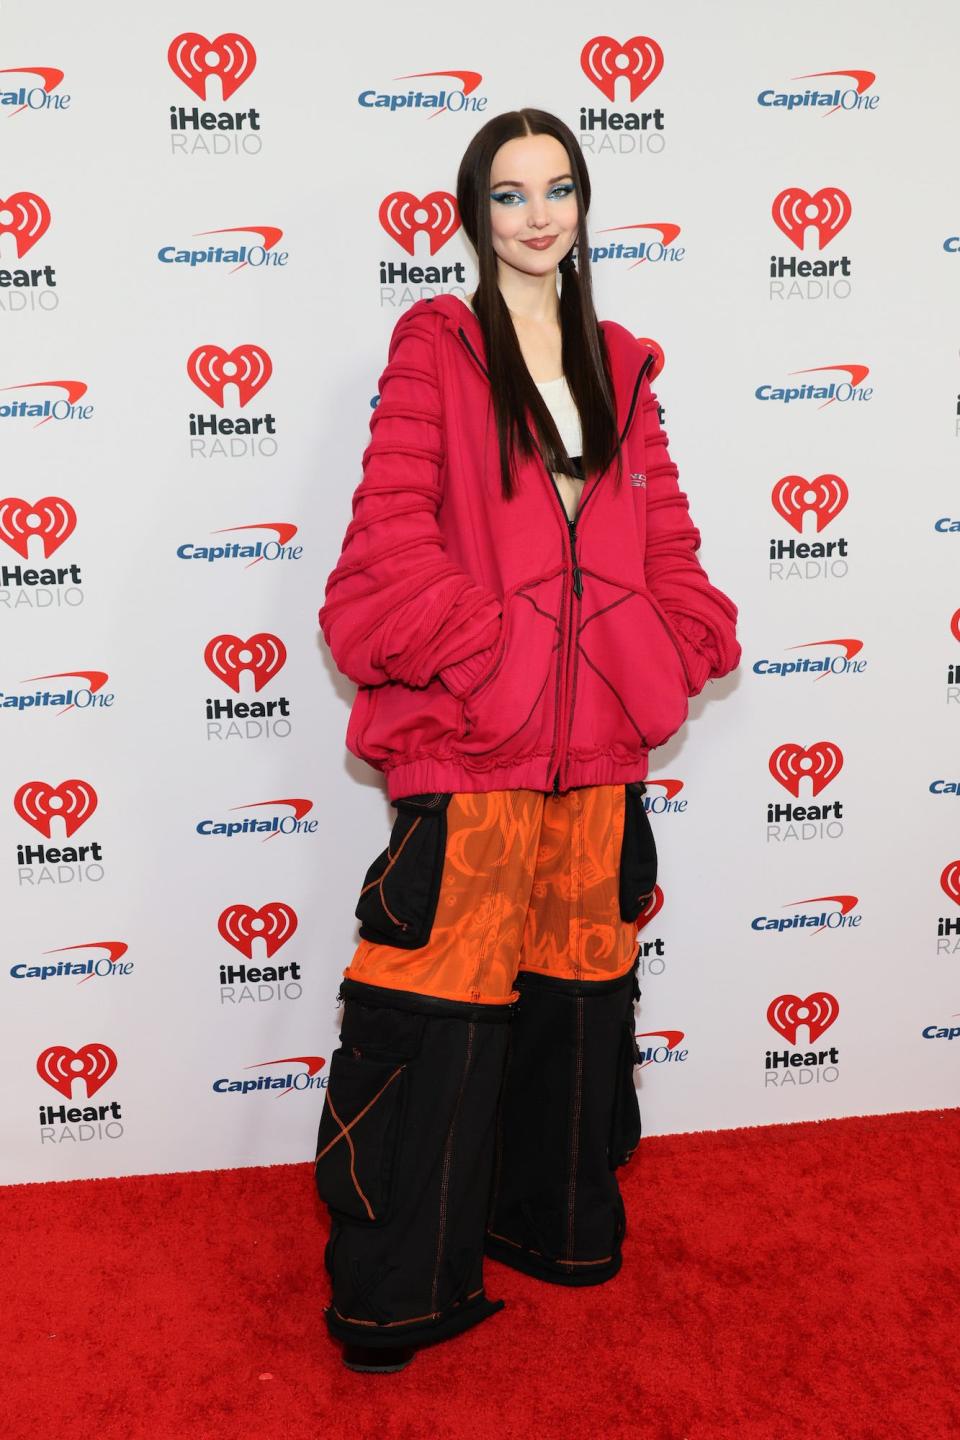 Dove Cameron at Z100's iHeartRadio Jingle Ball in New York City on December 9, 2022.